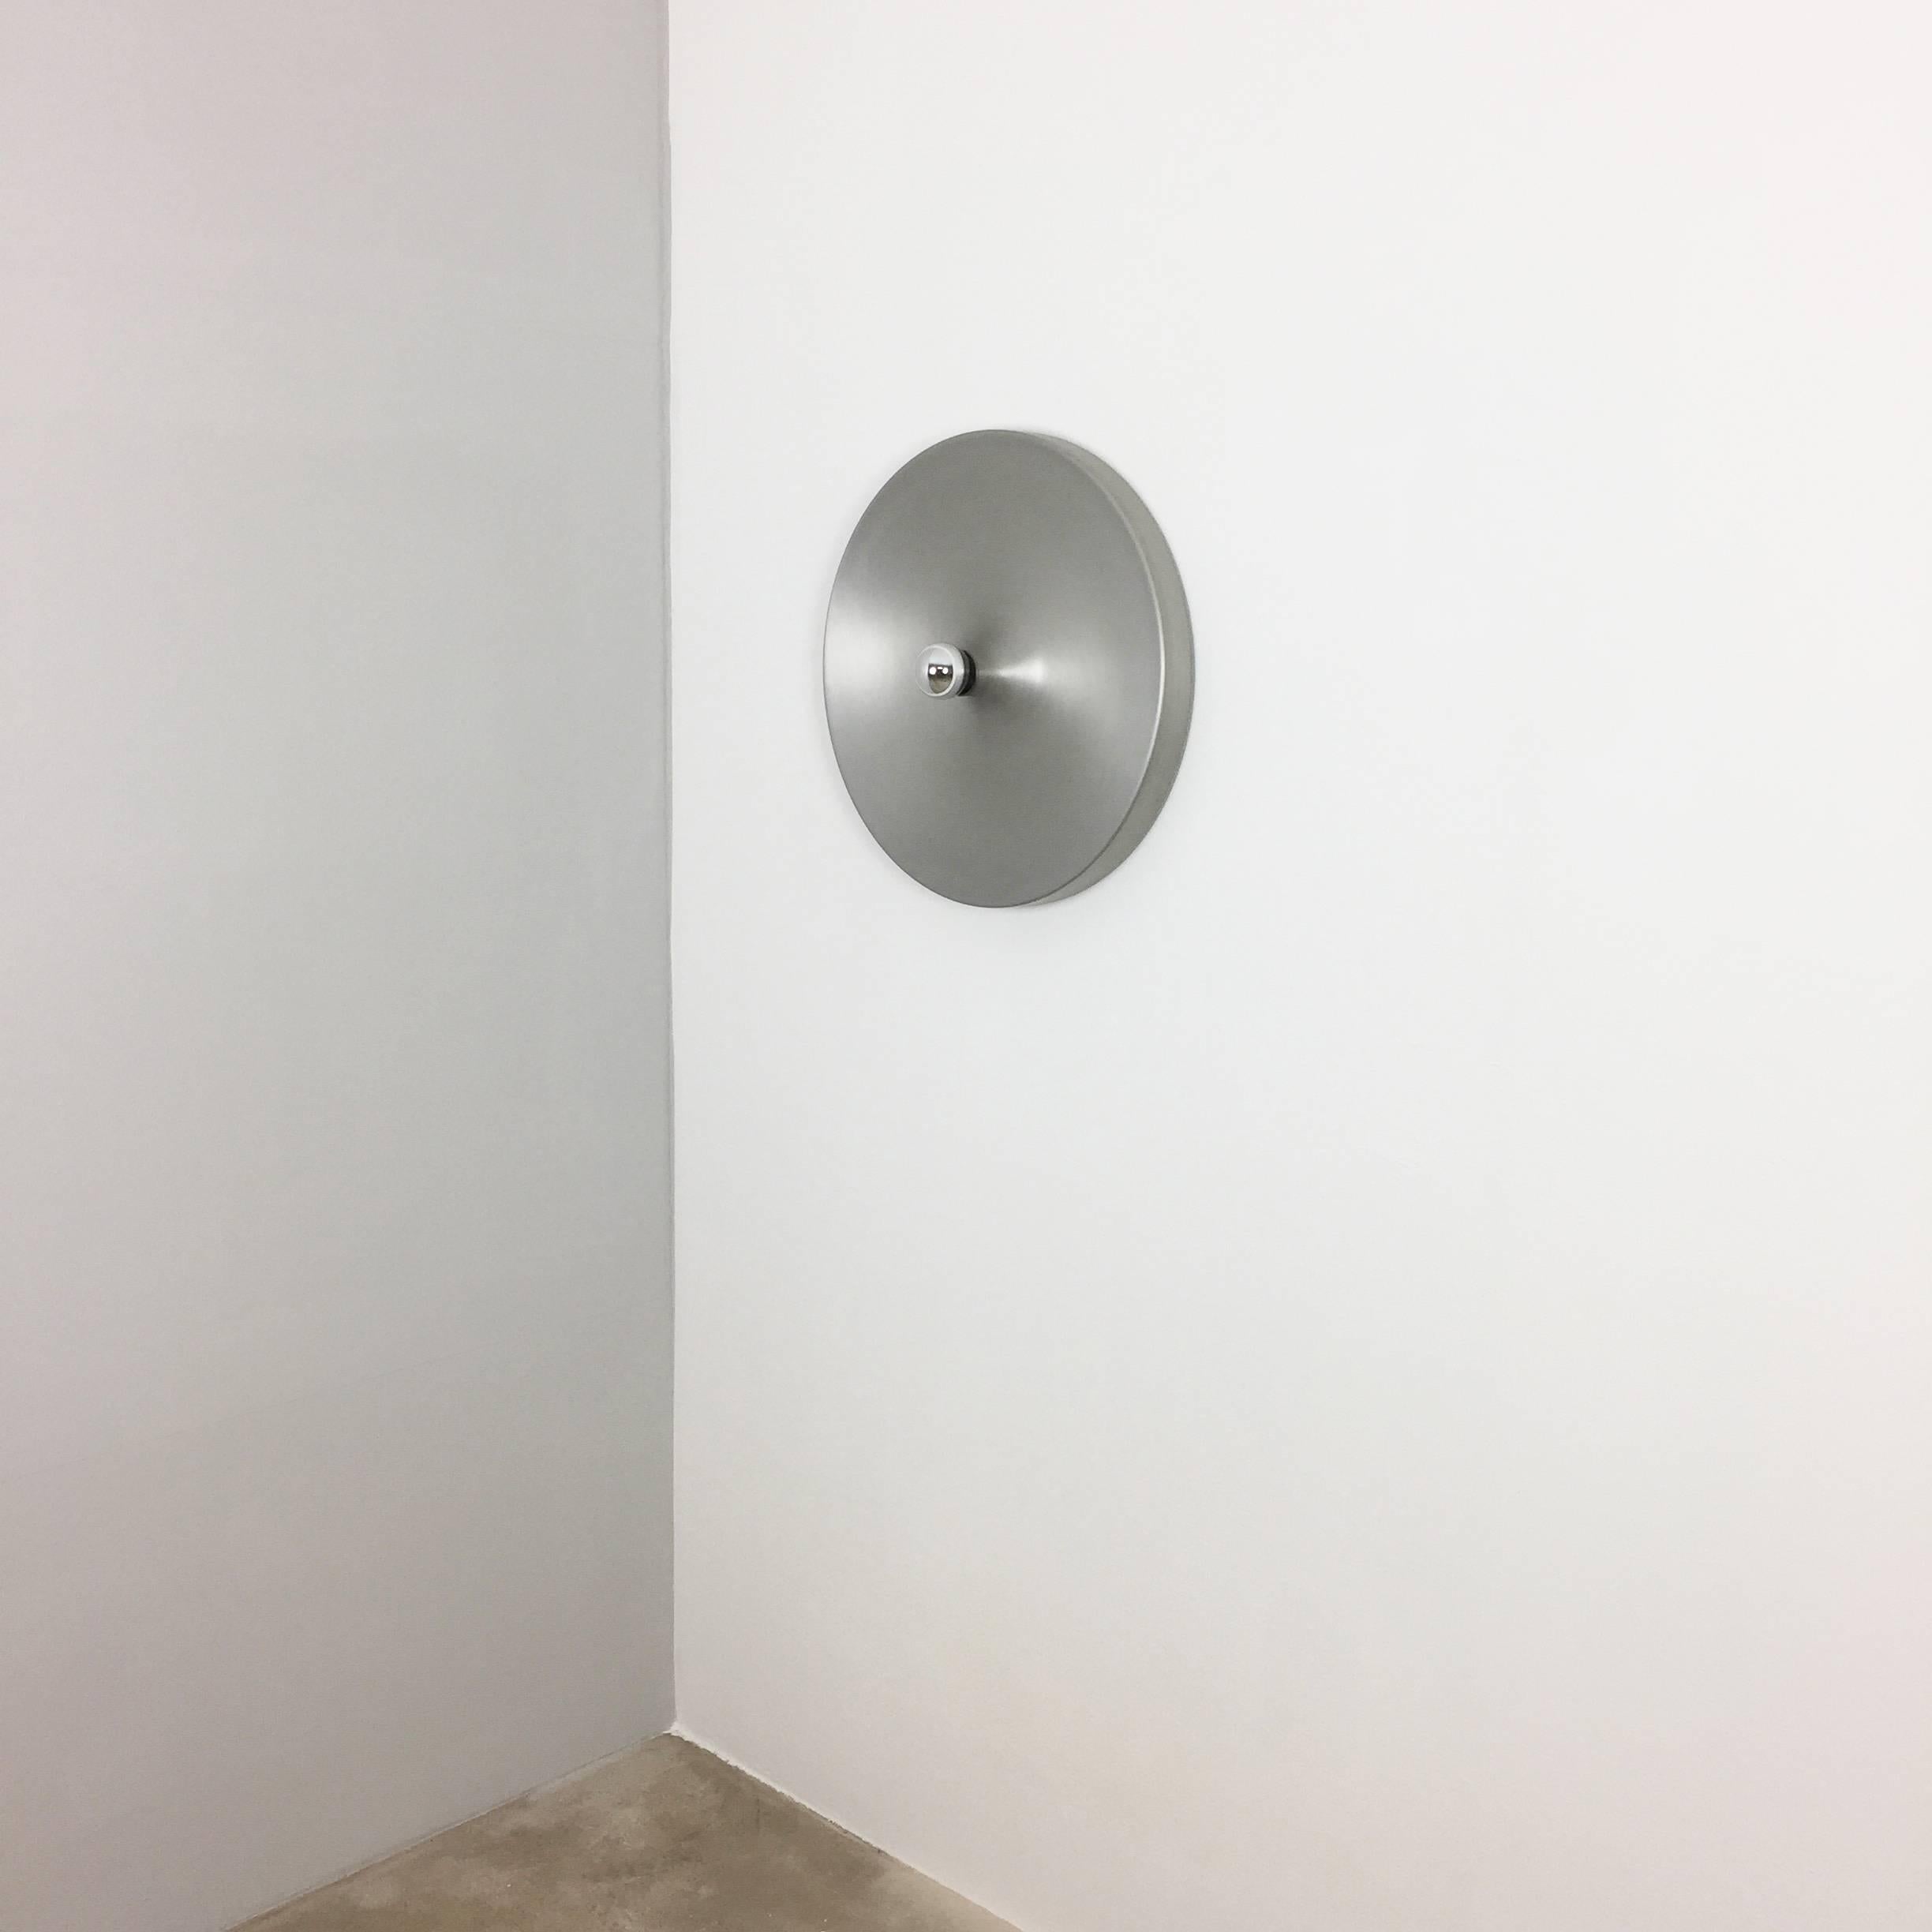 Article:

Extra-large wall light sconce


Producer:

Staff lights



Origin:

Germany



Age:

1970s



Description:

Original 1960s modernist German wall light made of solid metal. This super rare wall light was produced in